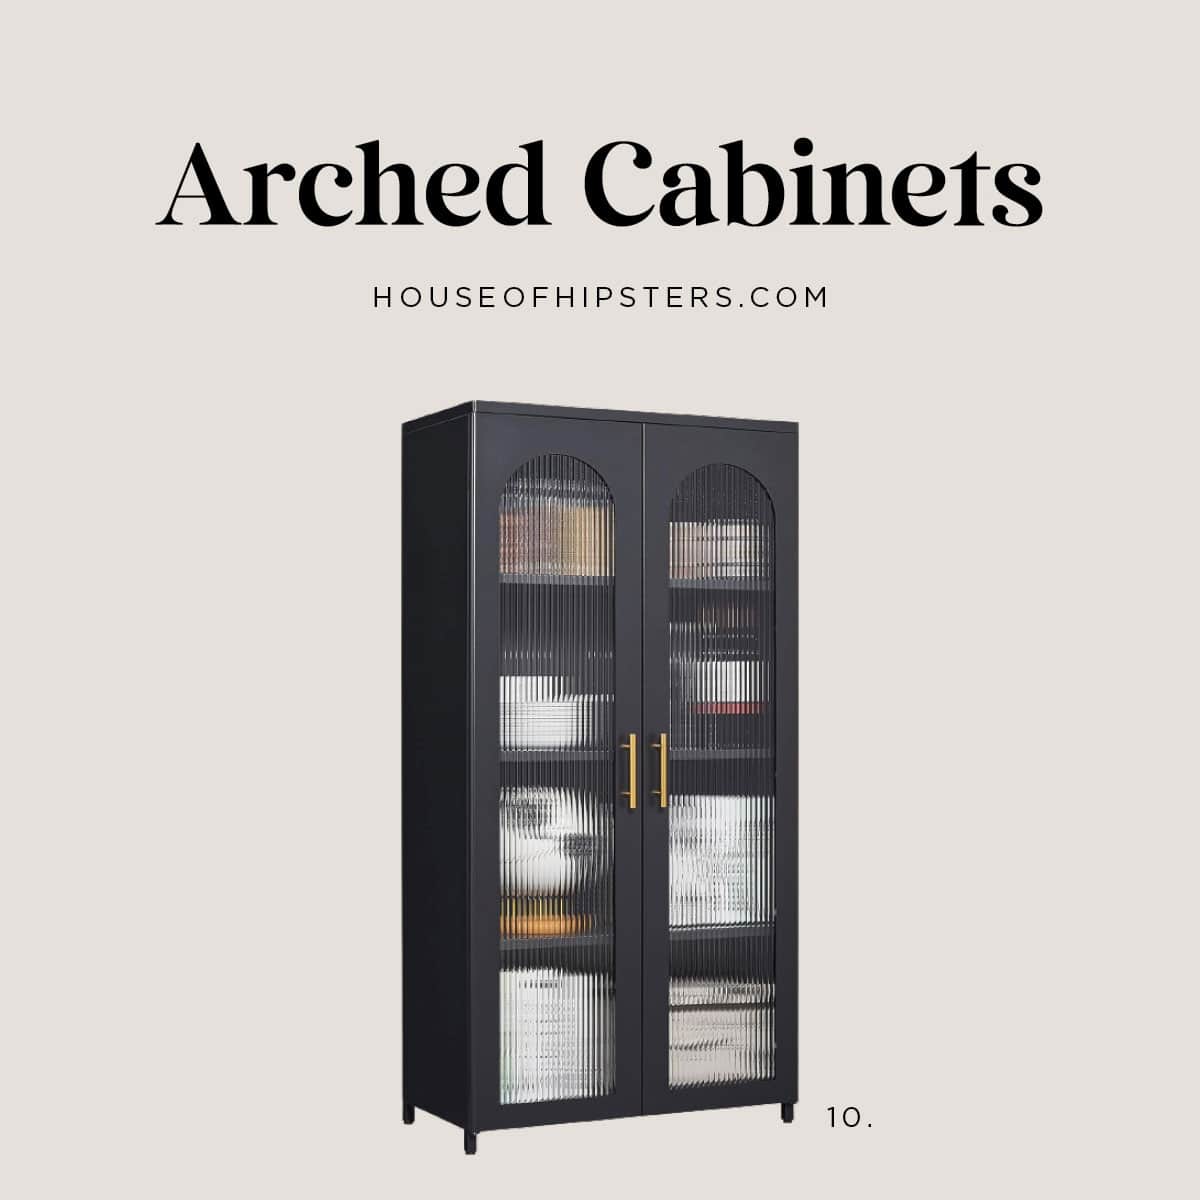 22 Stunning Arched Cabinets 2023 - Shop this affordable cabinet with arched fluted glass doors